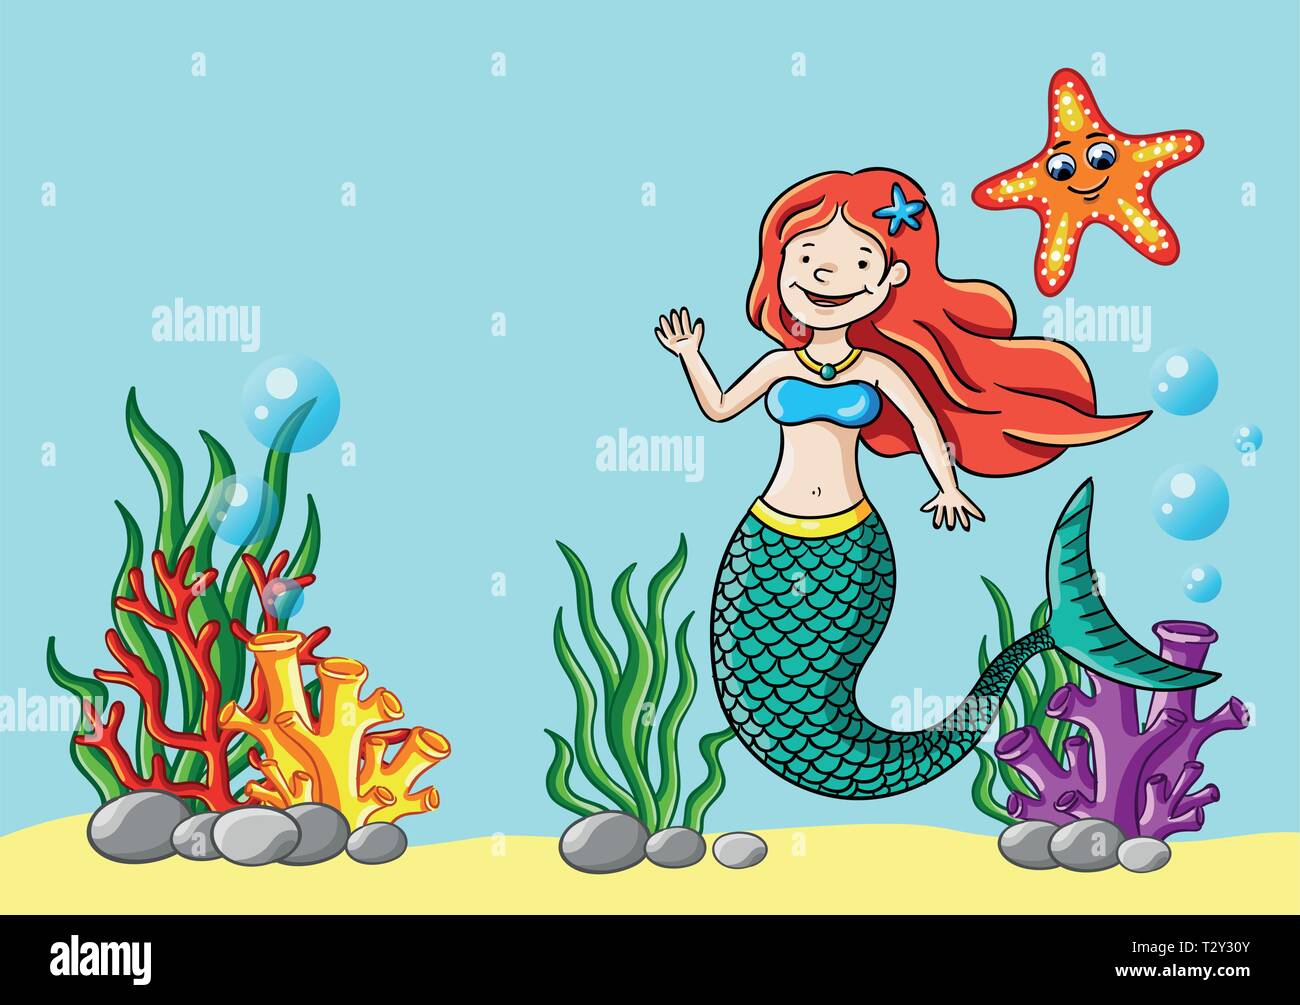 Vector illustration of young mermaid in the sea. Stock Vector